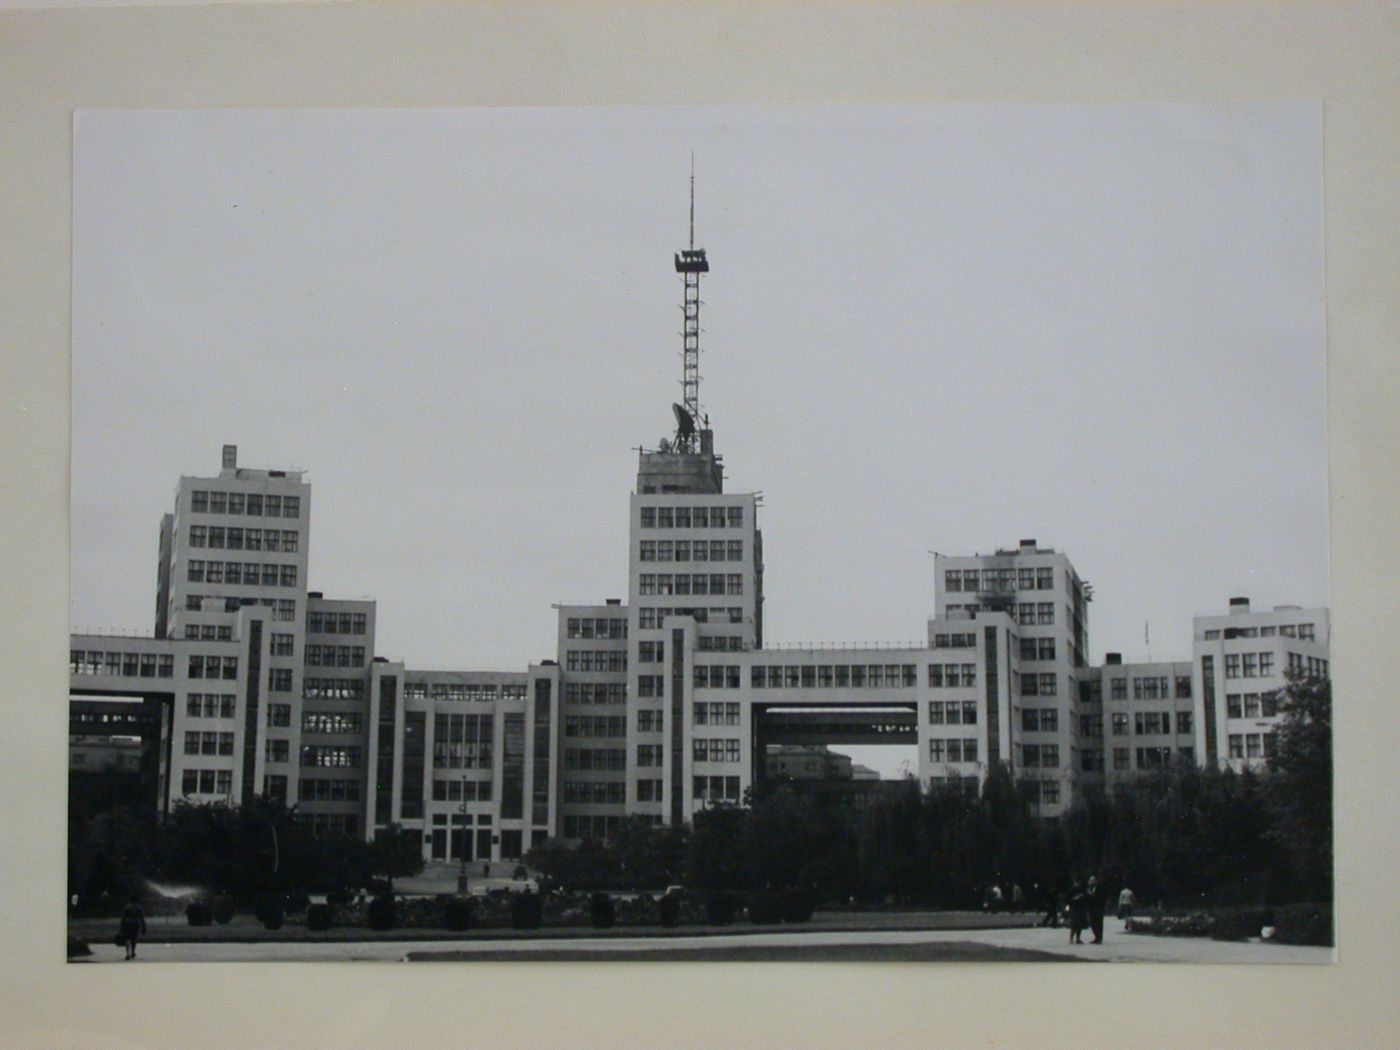 Exterior view of Department of Industry and Planning (Gosprom) buildings, Kharkov, Soviet Union (now in Ukraine)